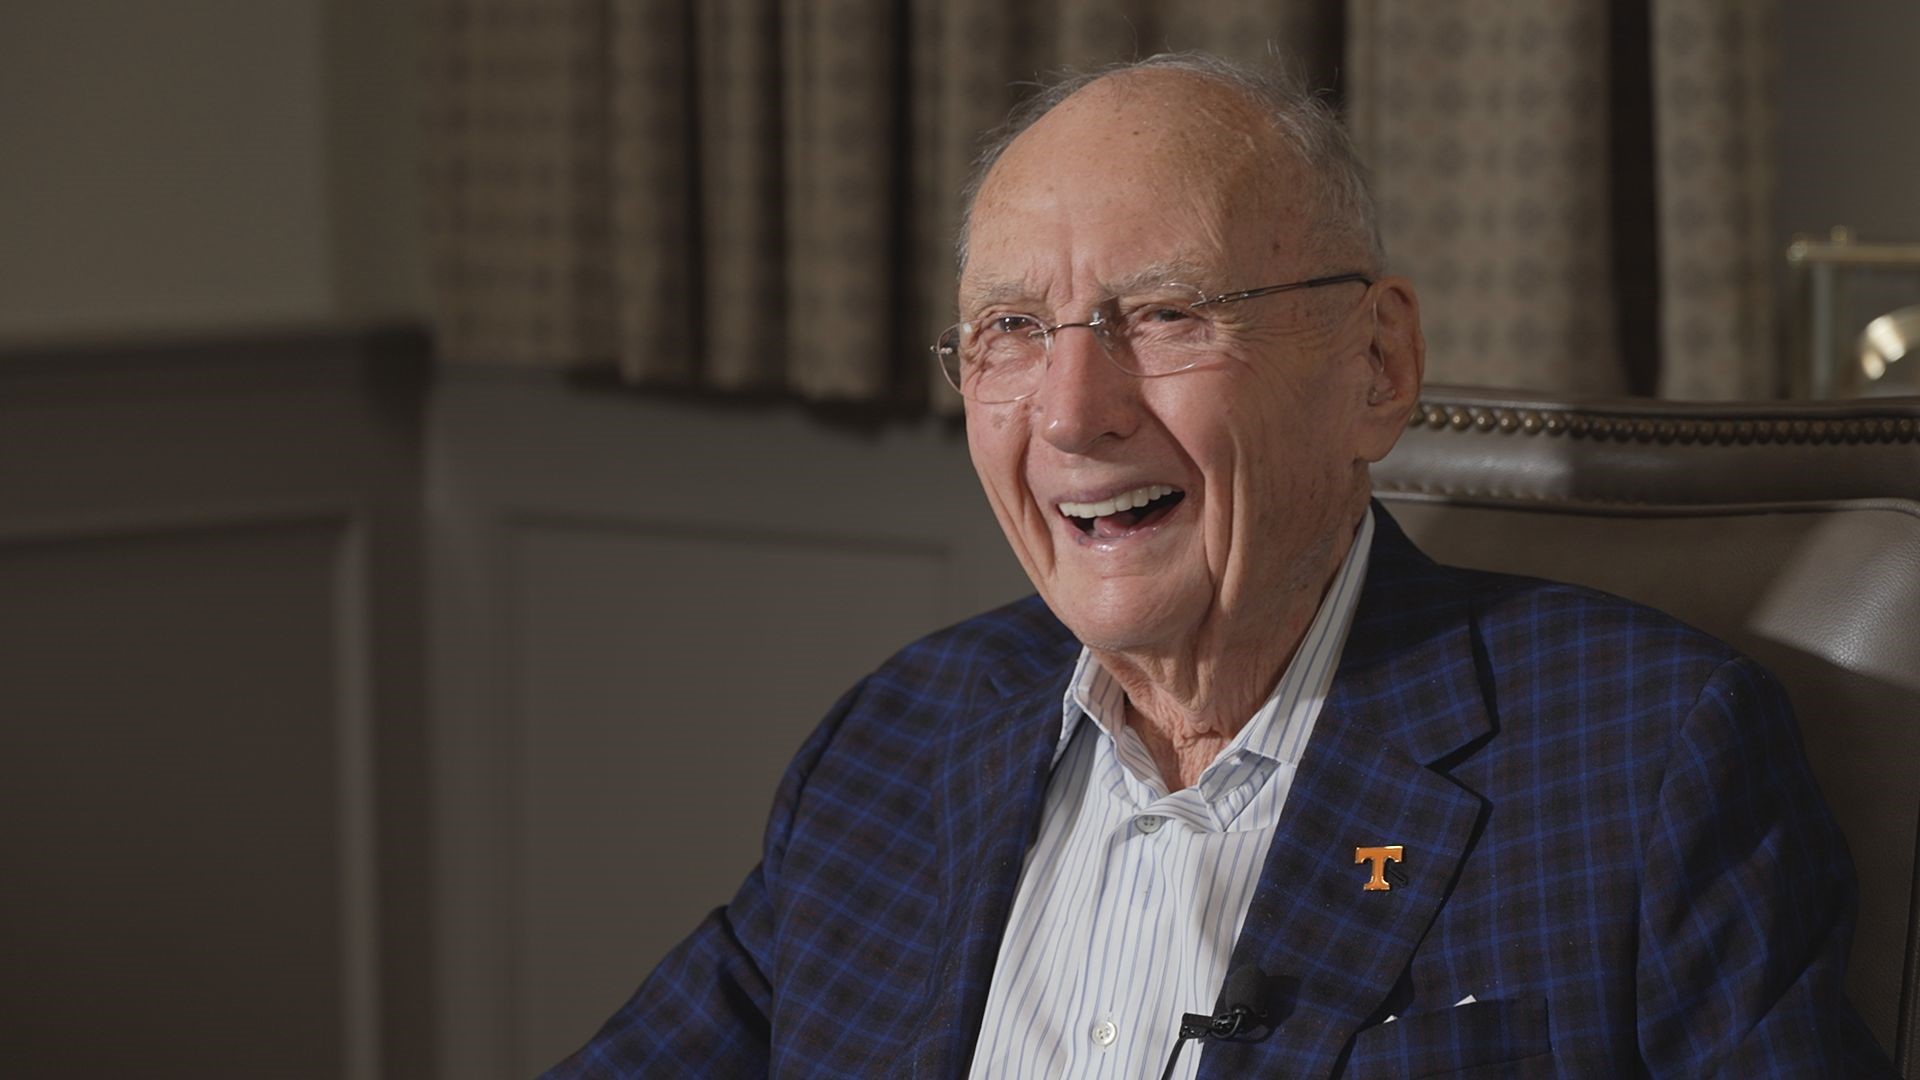 Jim sat down with us to talk about how Pilot got its name, the legacy of his company, and his reaction to it being sold to Warren Buffet's Bershire Hathaway.